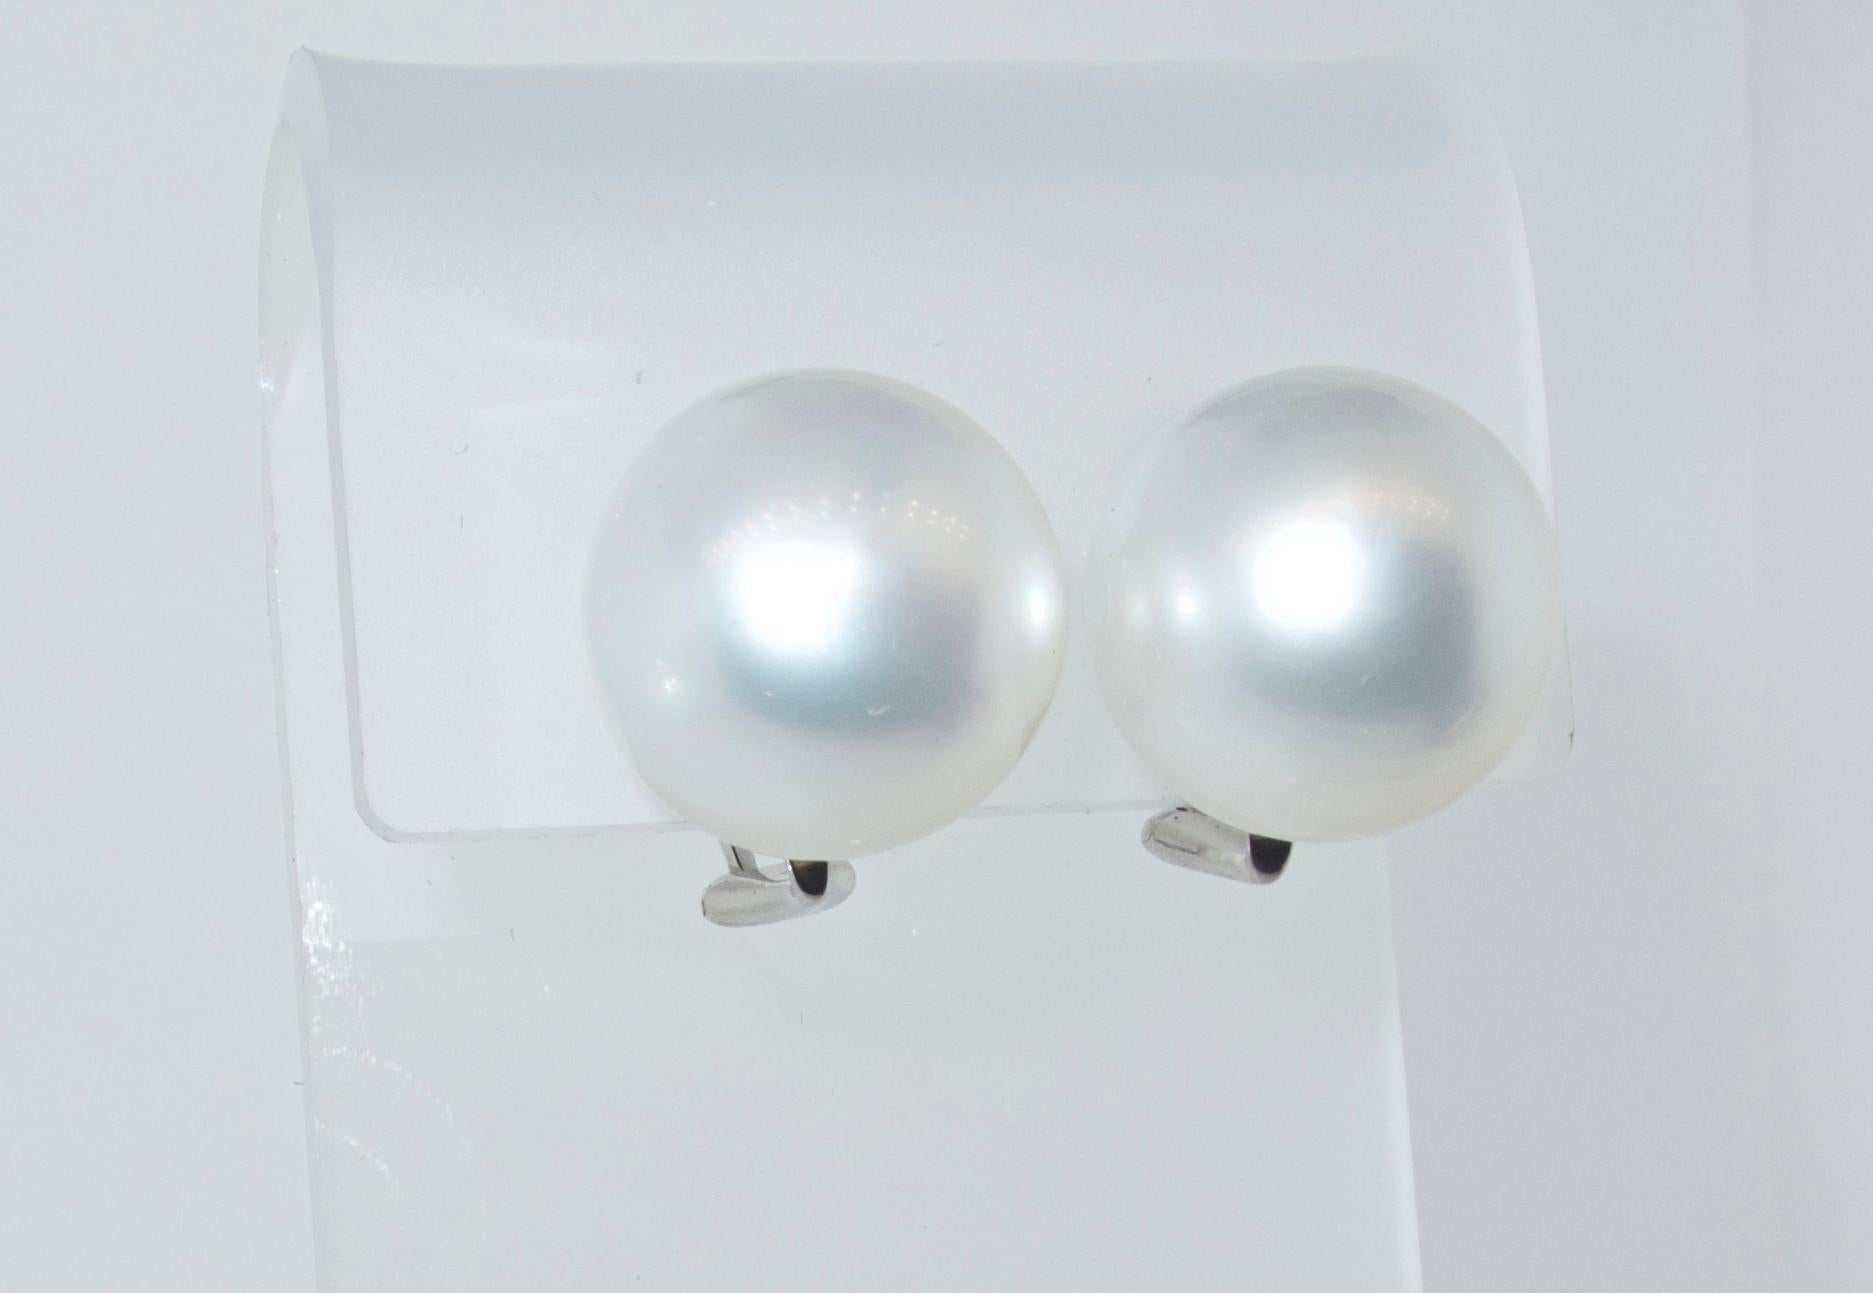 South Sea pearl earrings of very fine quality and extremely large - 17.9 and 18.0 mm.  Sometimes referred to triple A quality, these smooth skin, white even color, no pitting and round and makes these matched pair of South Sea Pearl earrings very